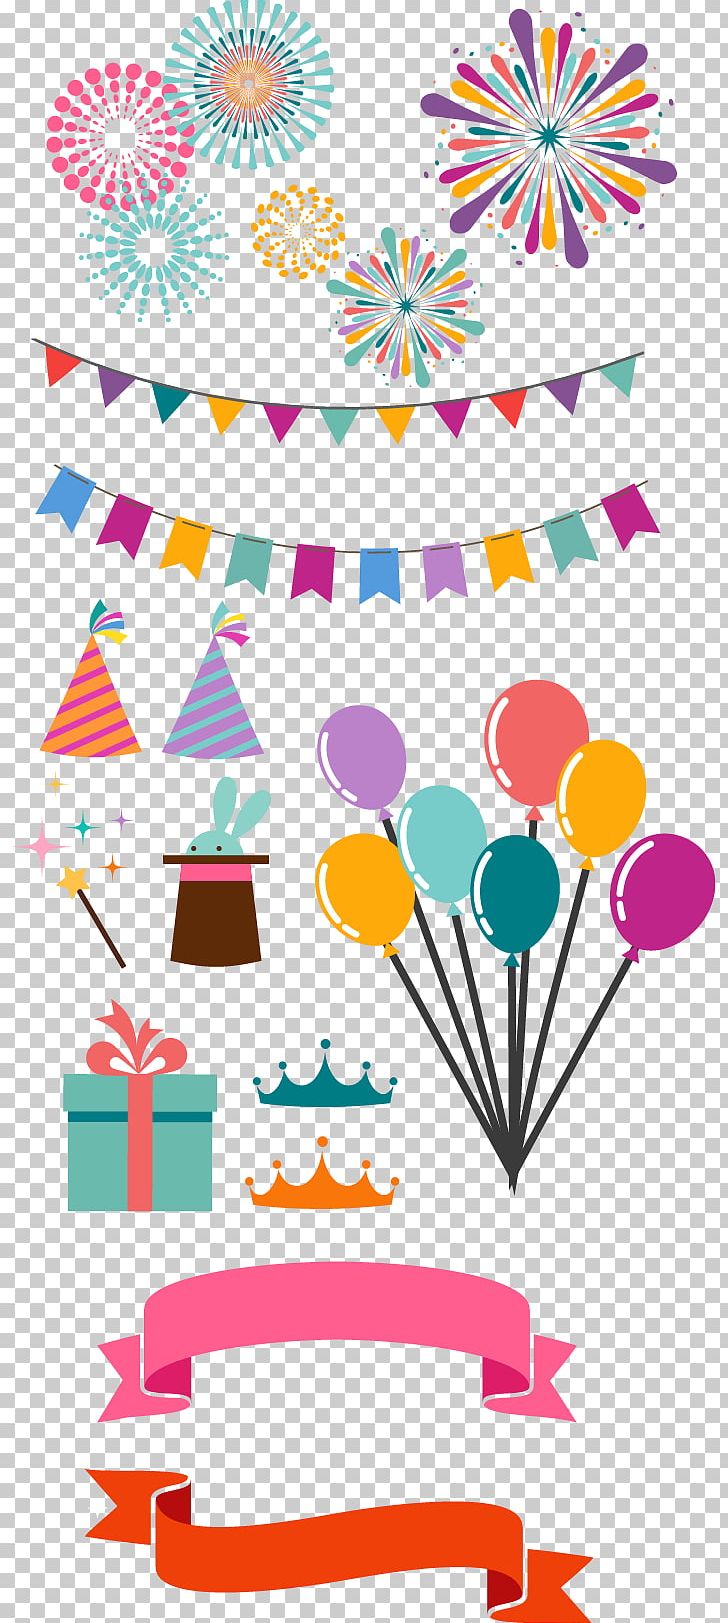 Flat Design Numerical Digit PNG, Clipart, Area, Balloon, Birthday Card, Birthday Elements, Birthday Invitation Free PNG Download